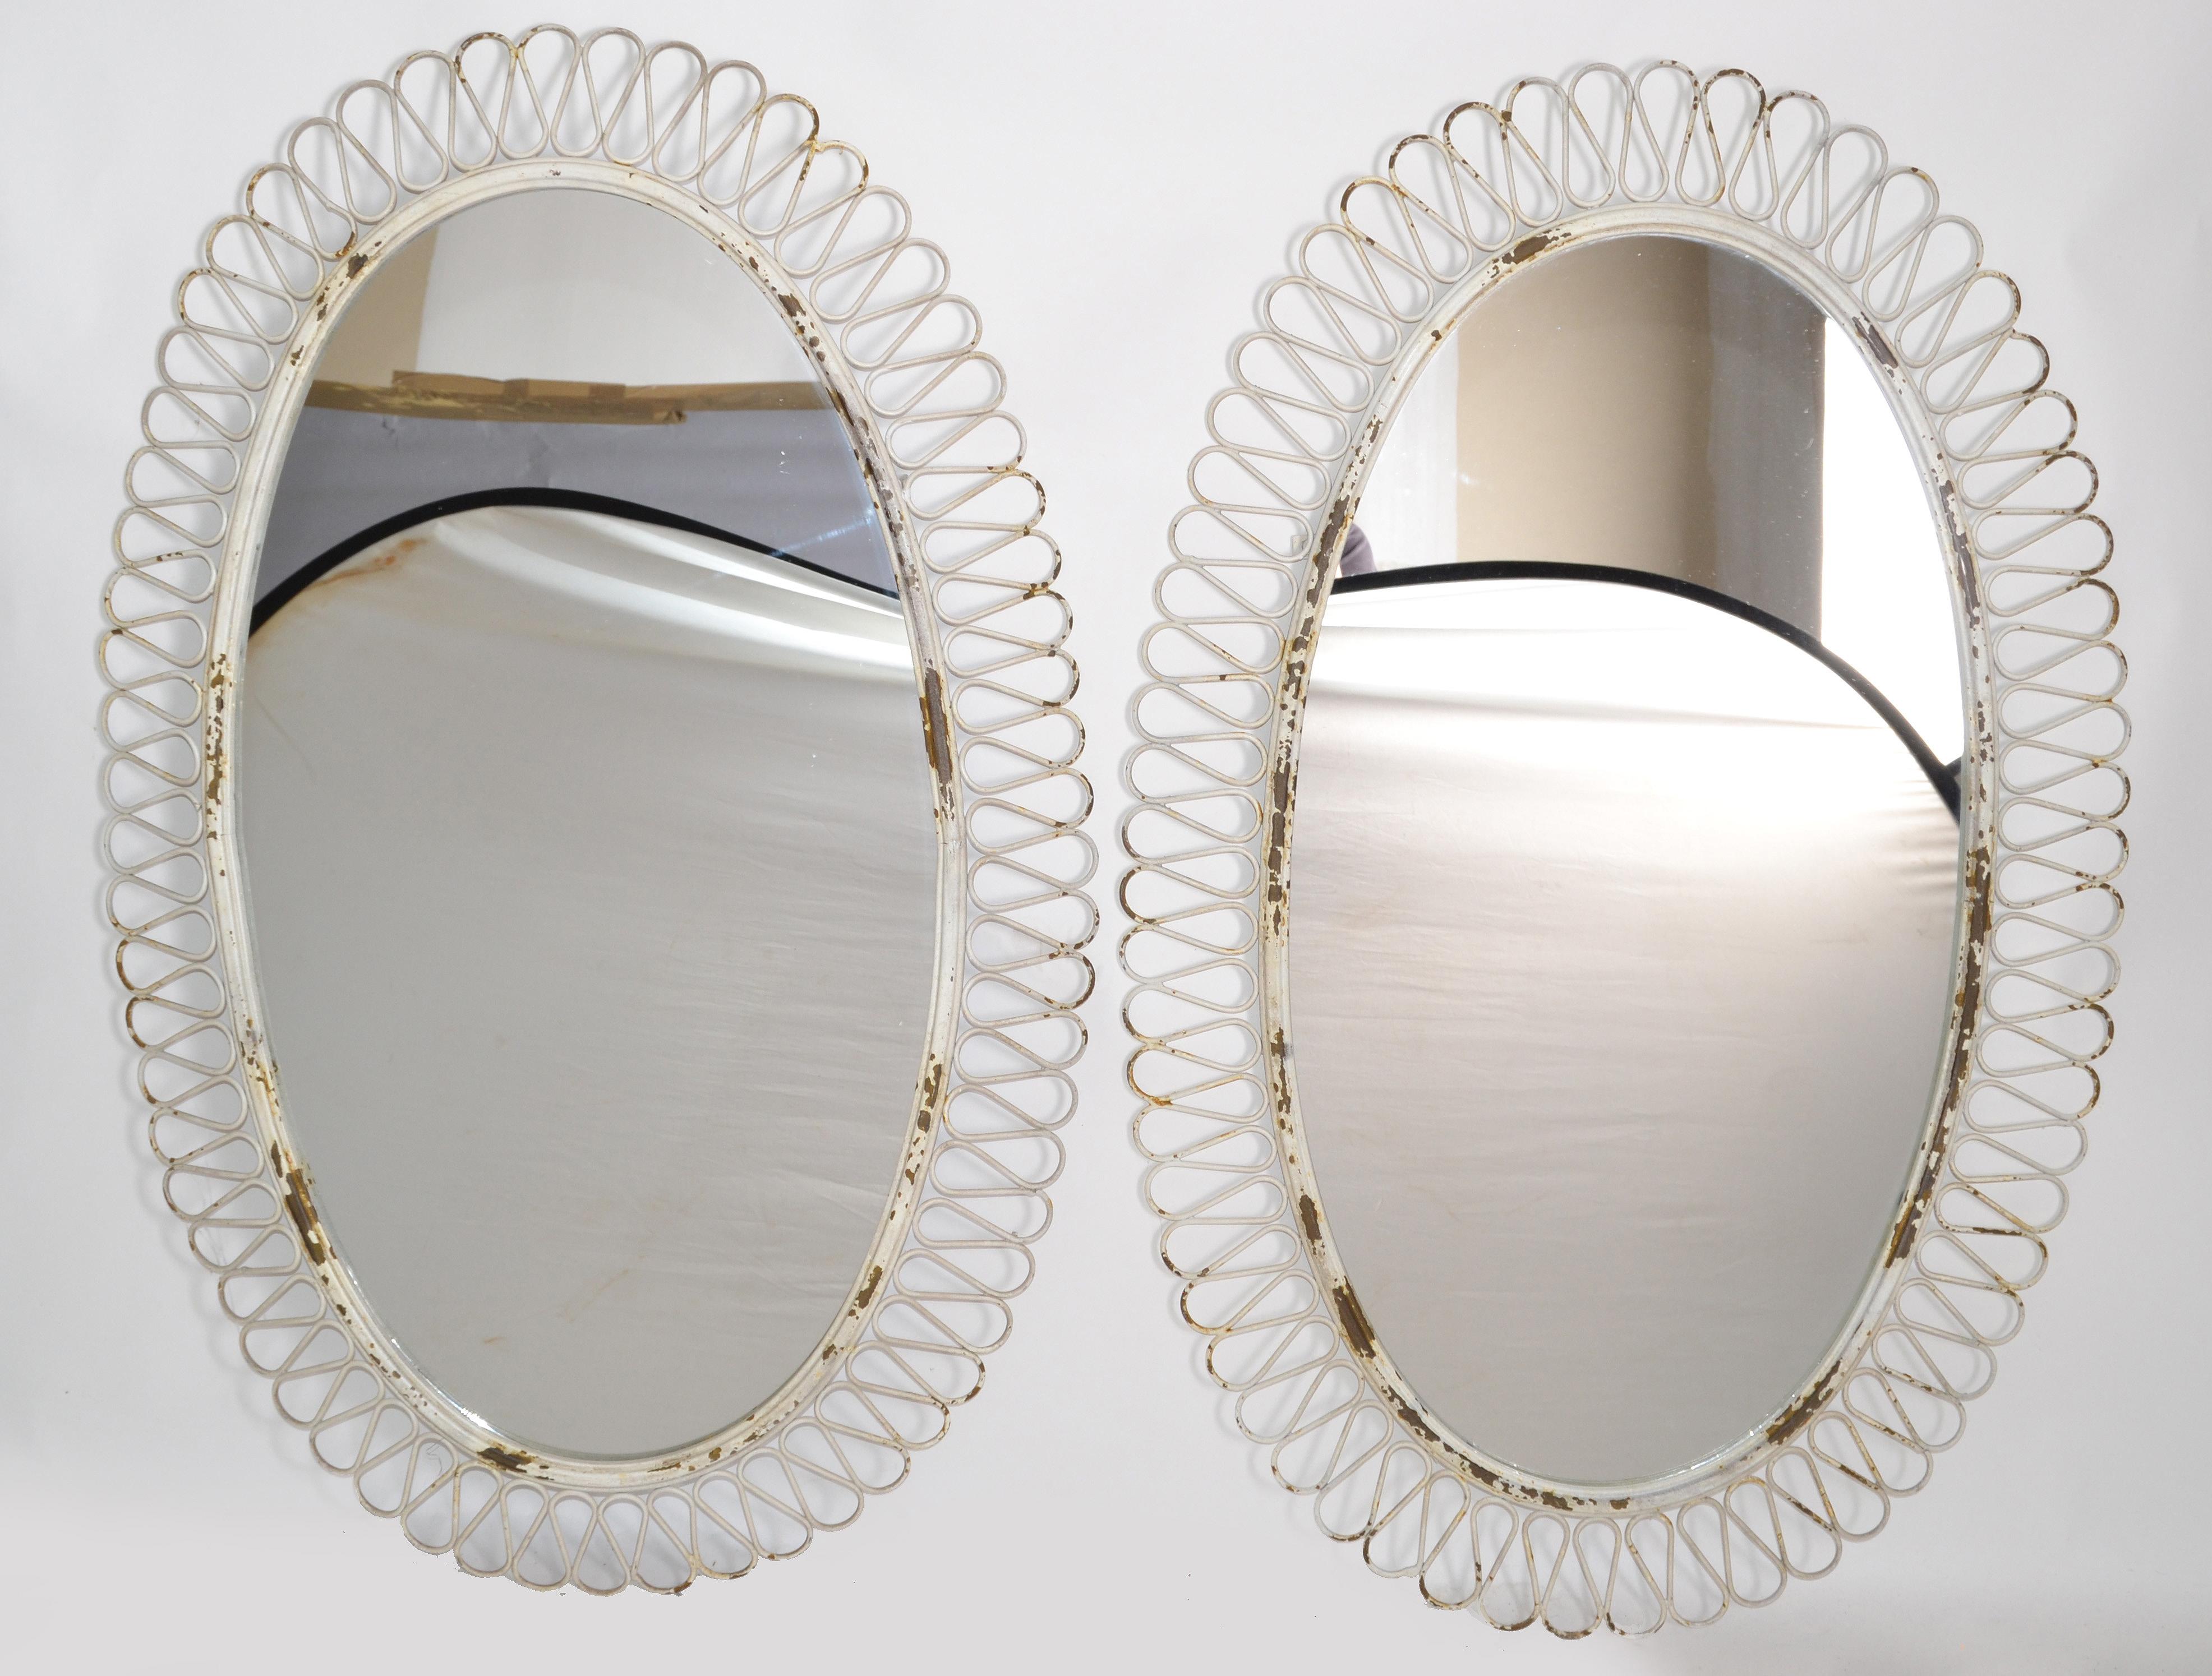 Pair of French Oval Wrought Iron Wall Mirror Antique White distressed Look, 1950 7